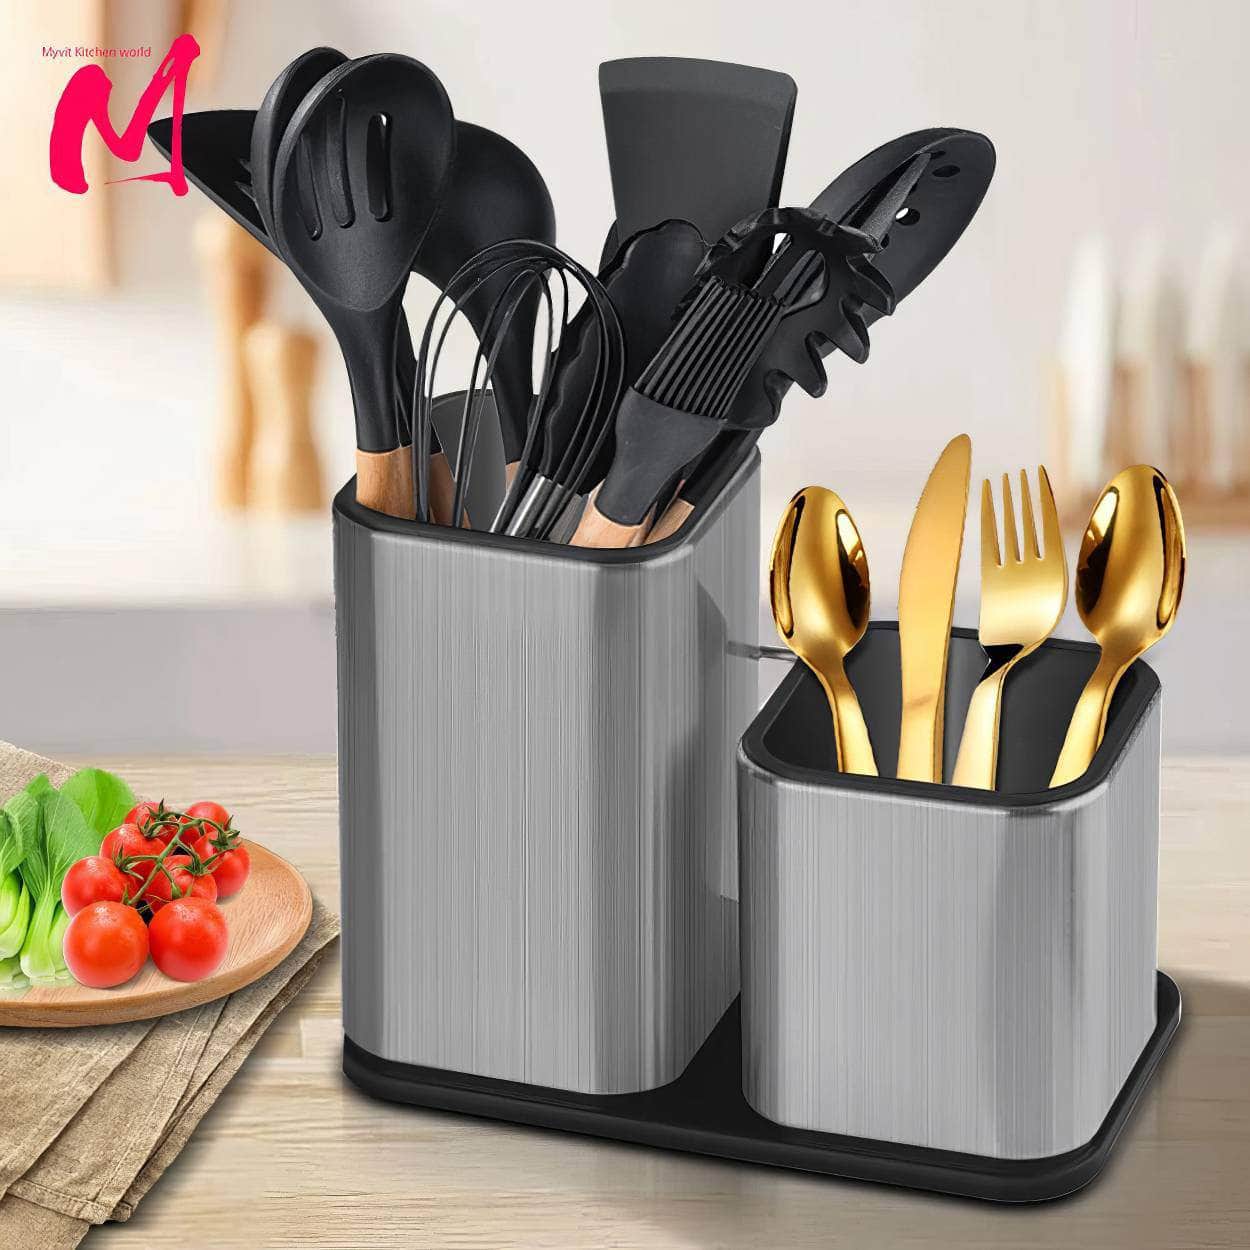 Stainless Steel Knife Stand Holder - High-End Cutlery Storage Block for Kitchen Accessories